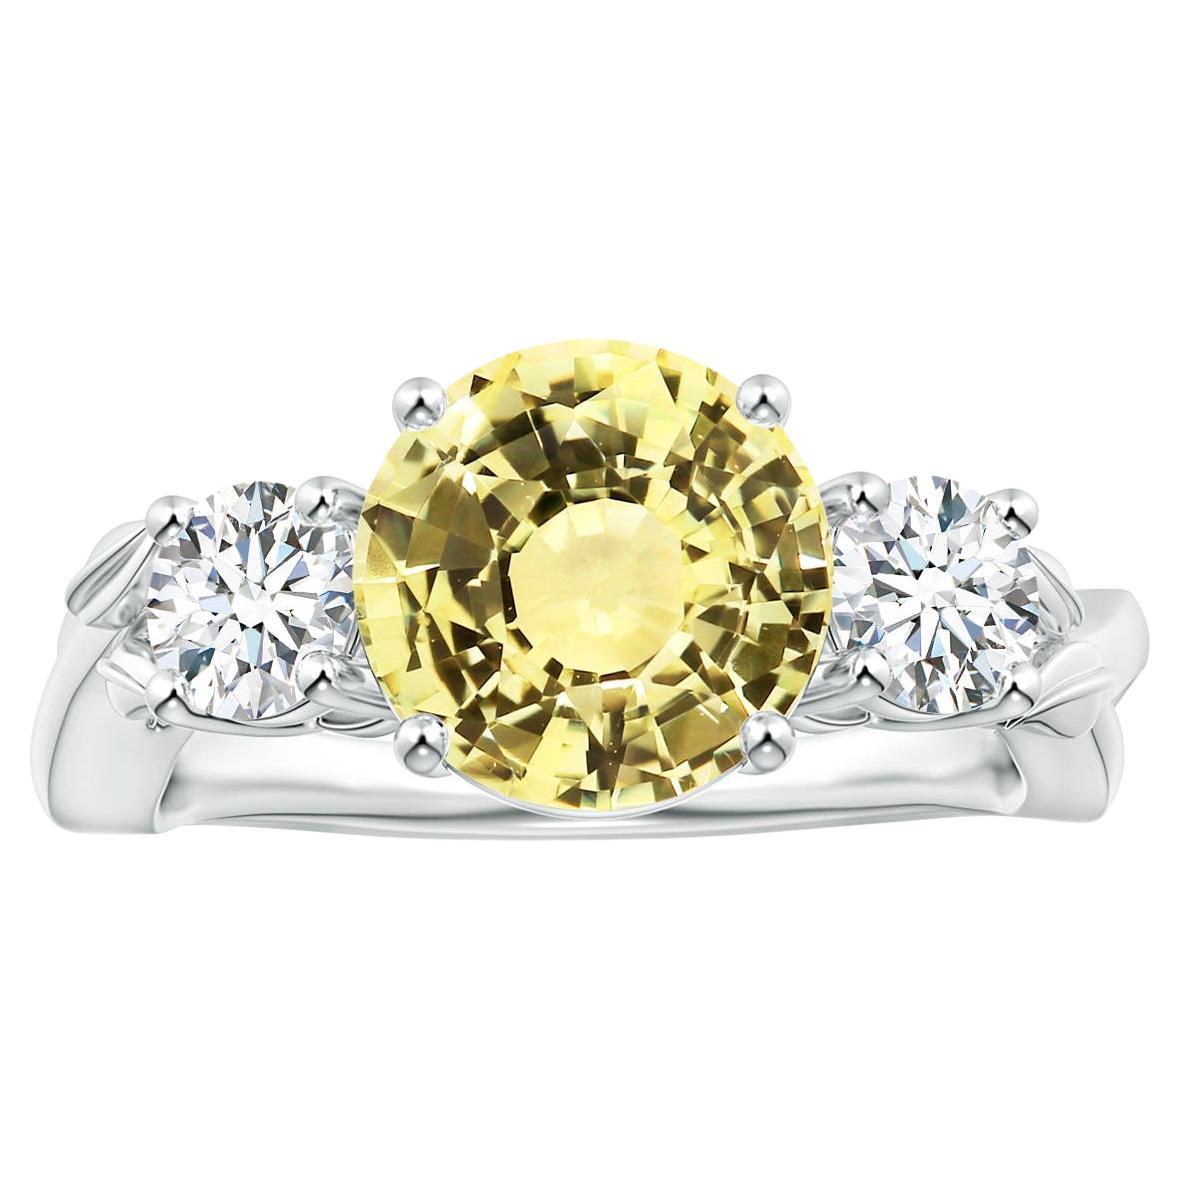 For Sale:  Angara Gia Certified Yellow Sapphire Three Stone Ring in Platinum with Diamonds